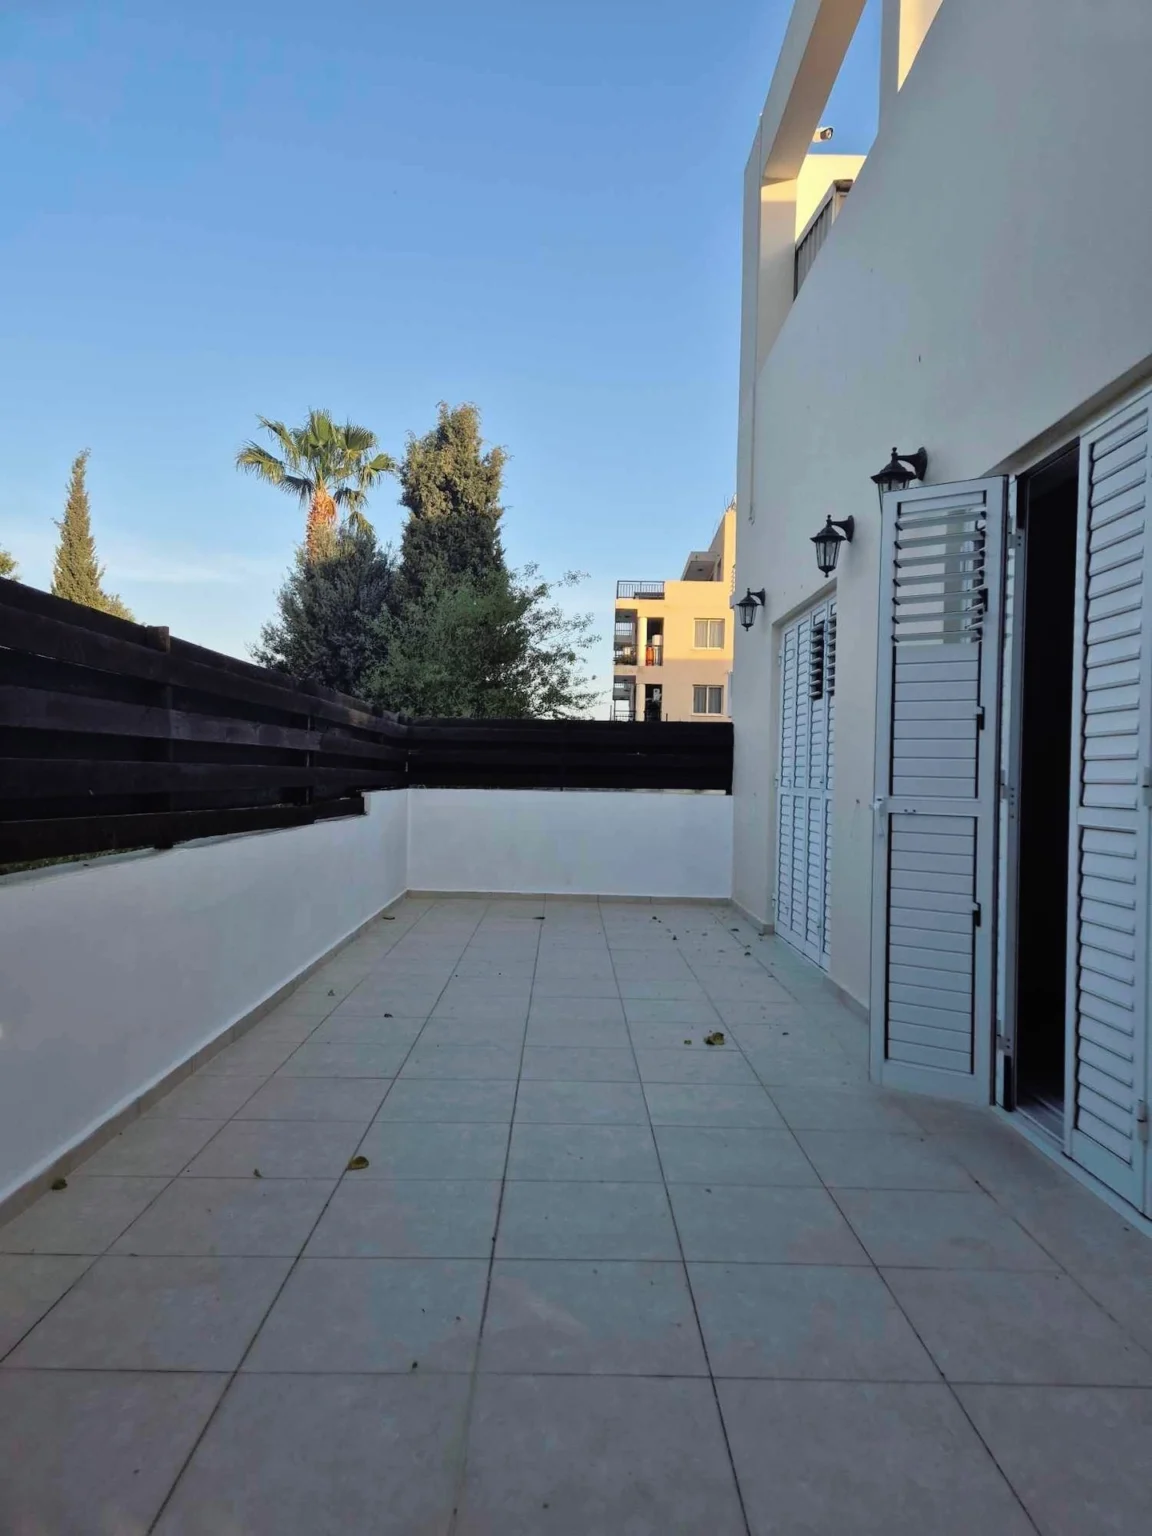 3 Bedroom House for Rent in Agia Marinouda, Paphos District